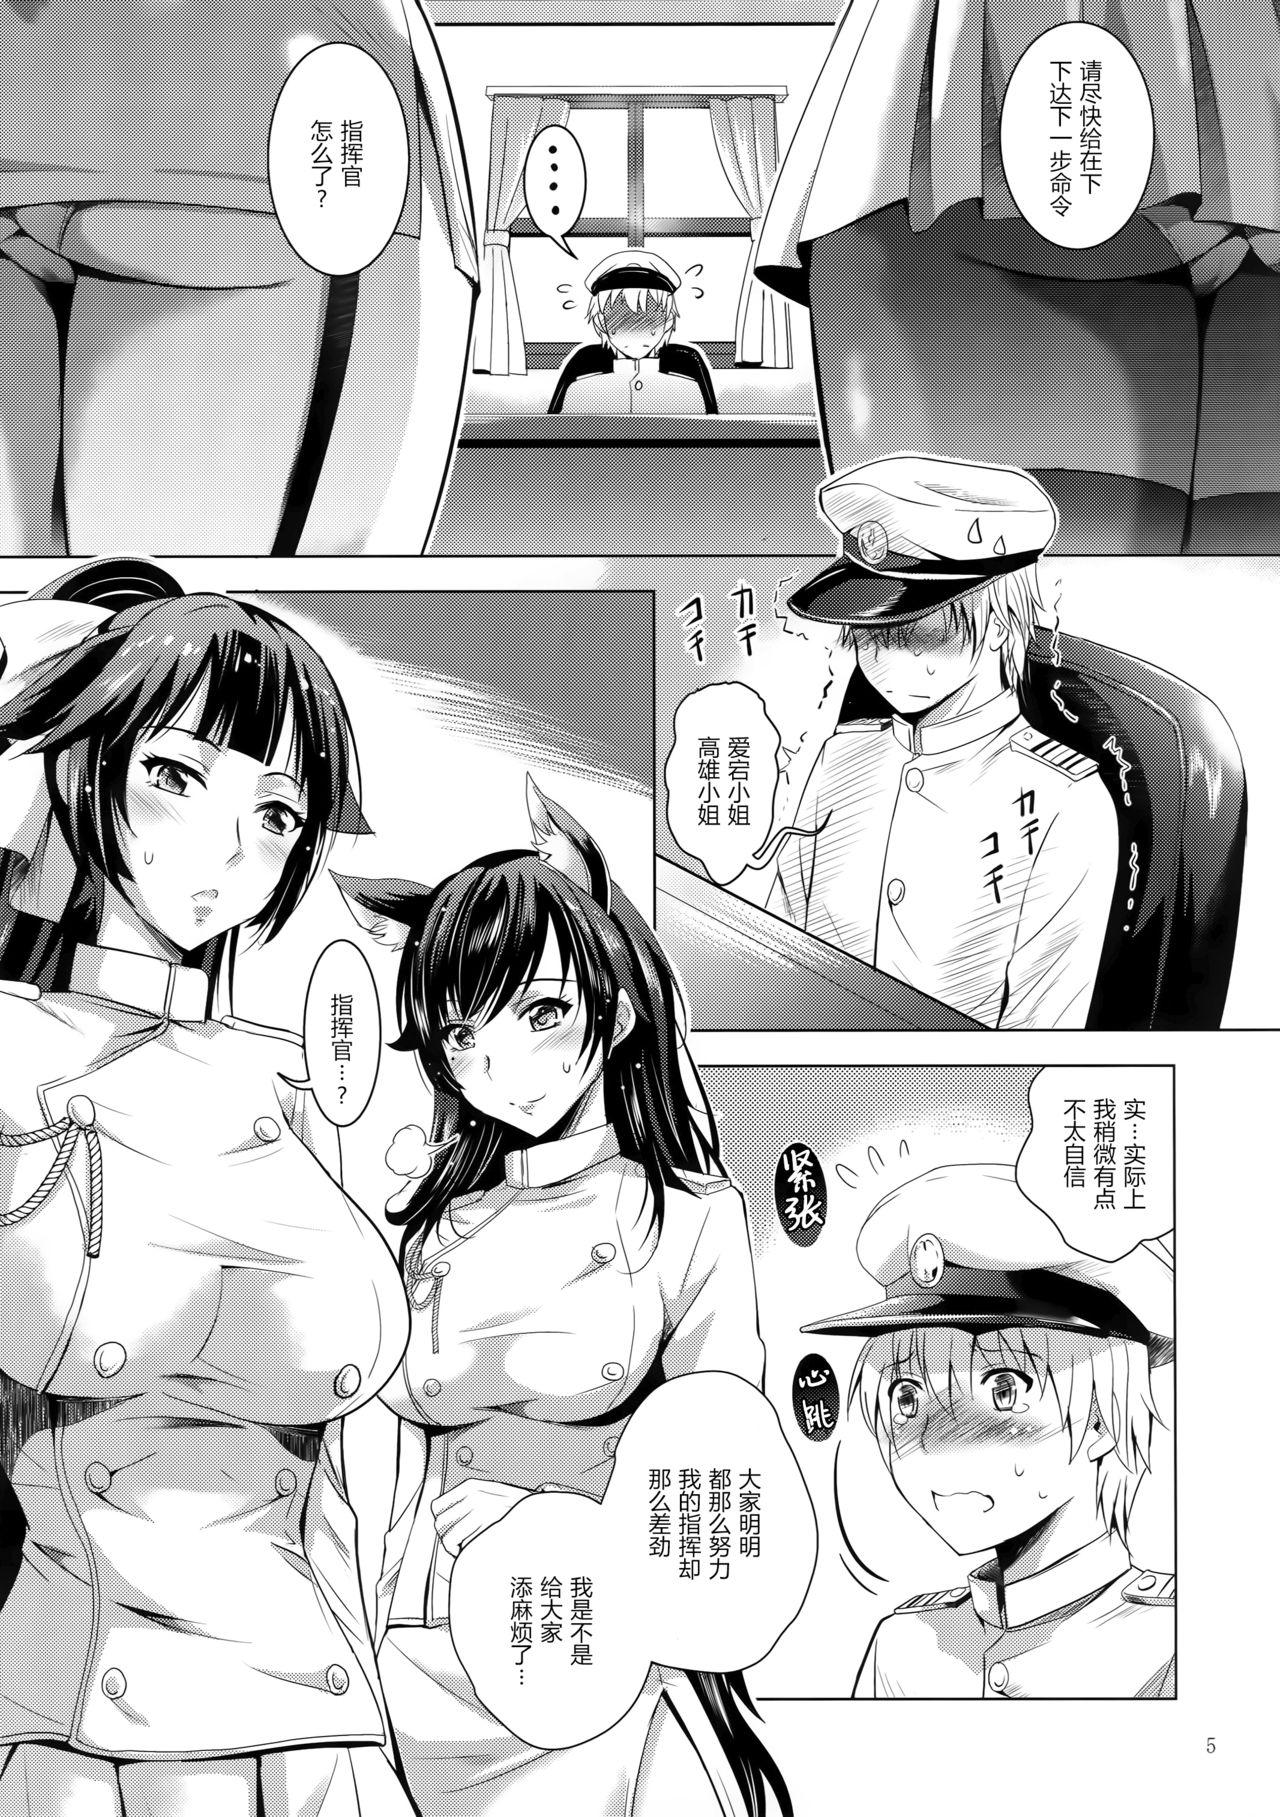 18 Year Old Porn MOUSOU THEATER 56 - Azur lane Hardcore Sex - Page 5